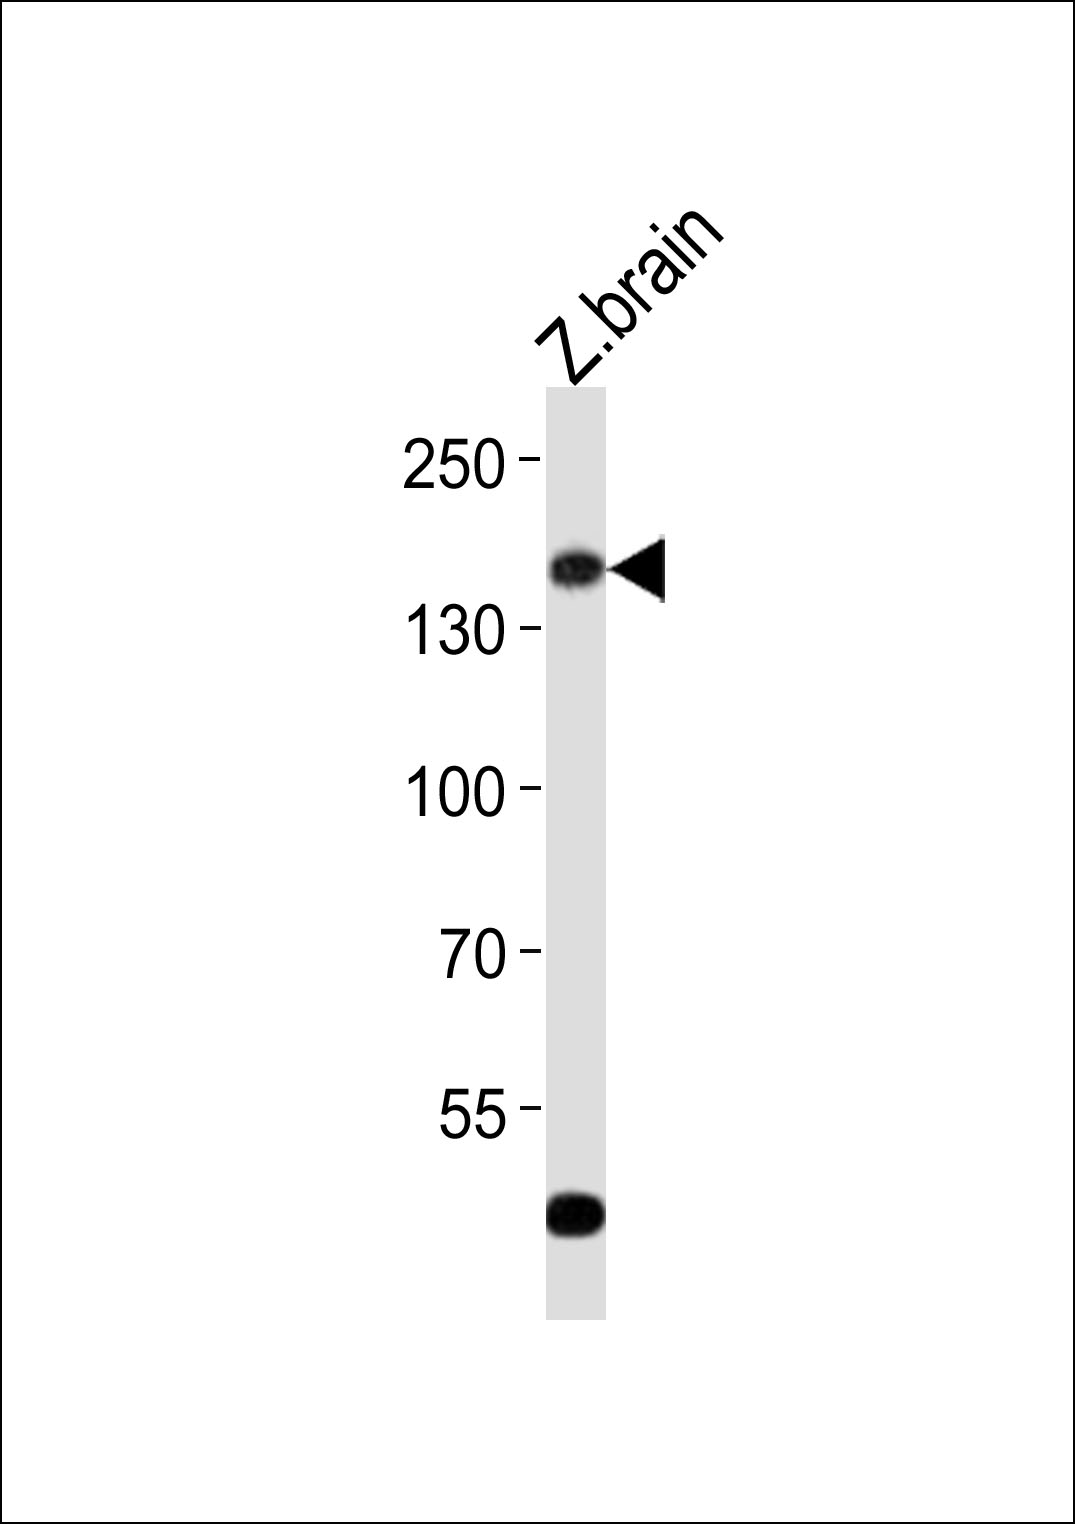 Western blot analysis of lysate from zebra fish brain tissue lysate,  using (DANRE) gpr126 Antibody (C-term)(Cat.  #AP21136a). AP21136a was diluted at 1:500.  A goat anti-rabbit IgG H&L(HRP) at 1:10000 dilution was used as the secondary antibody. Lysate at 20ug.